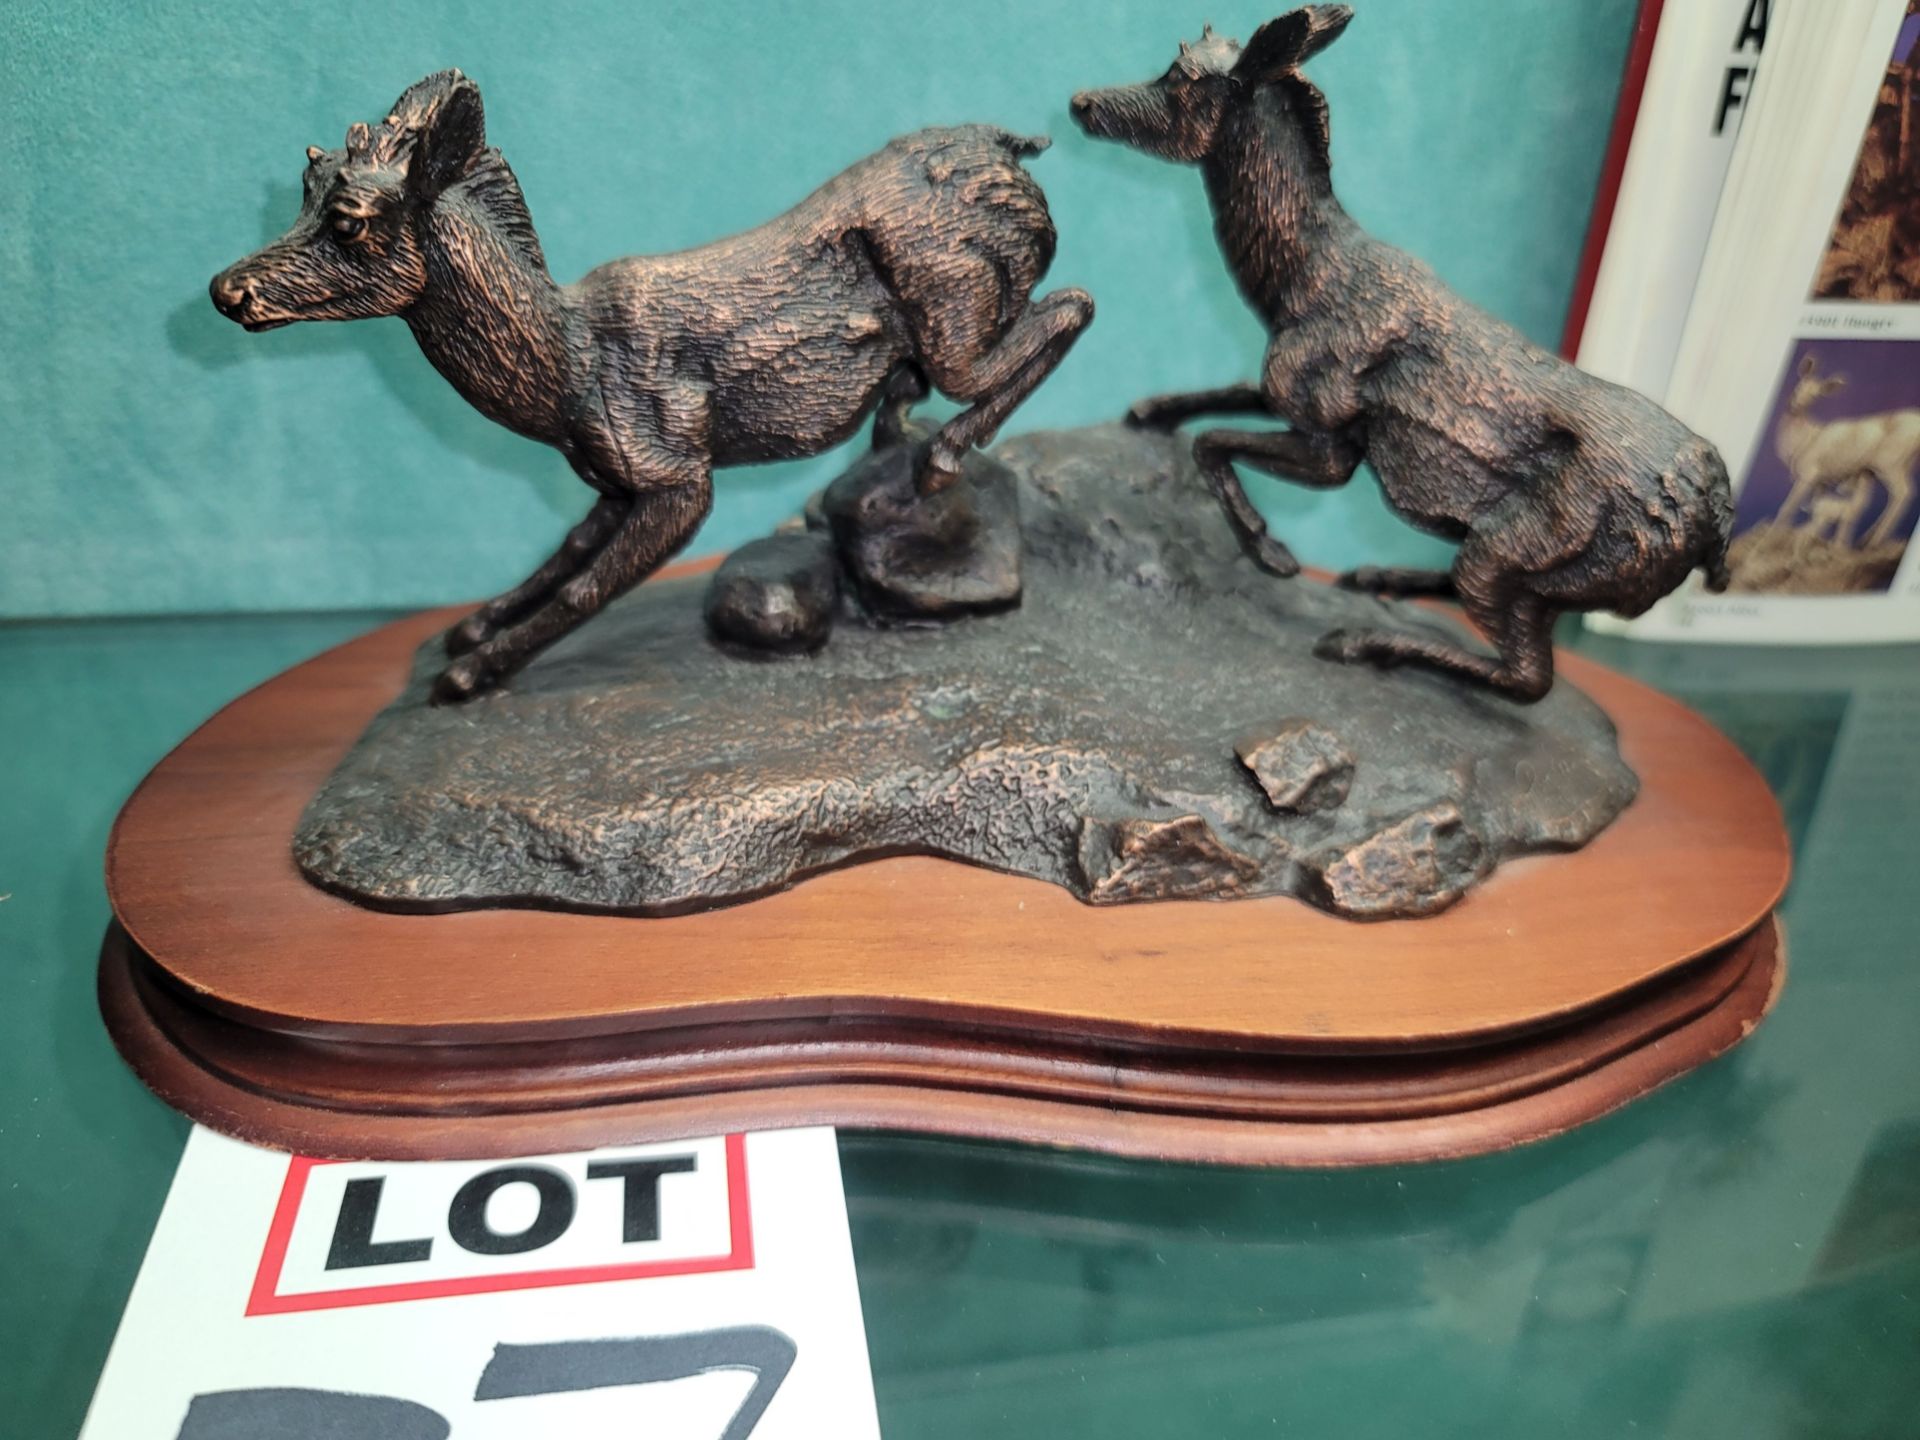 "CATCHING UP", WILDLIFE ART SCULPTURE, SOLID PEWTER MOUNTED ON A WOOD BASE, SIZE: 10.5" X 9" X 5.5", - Image 2 of 2